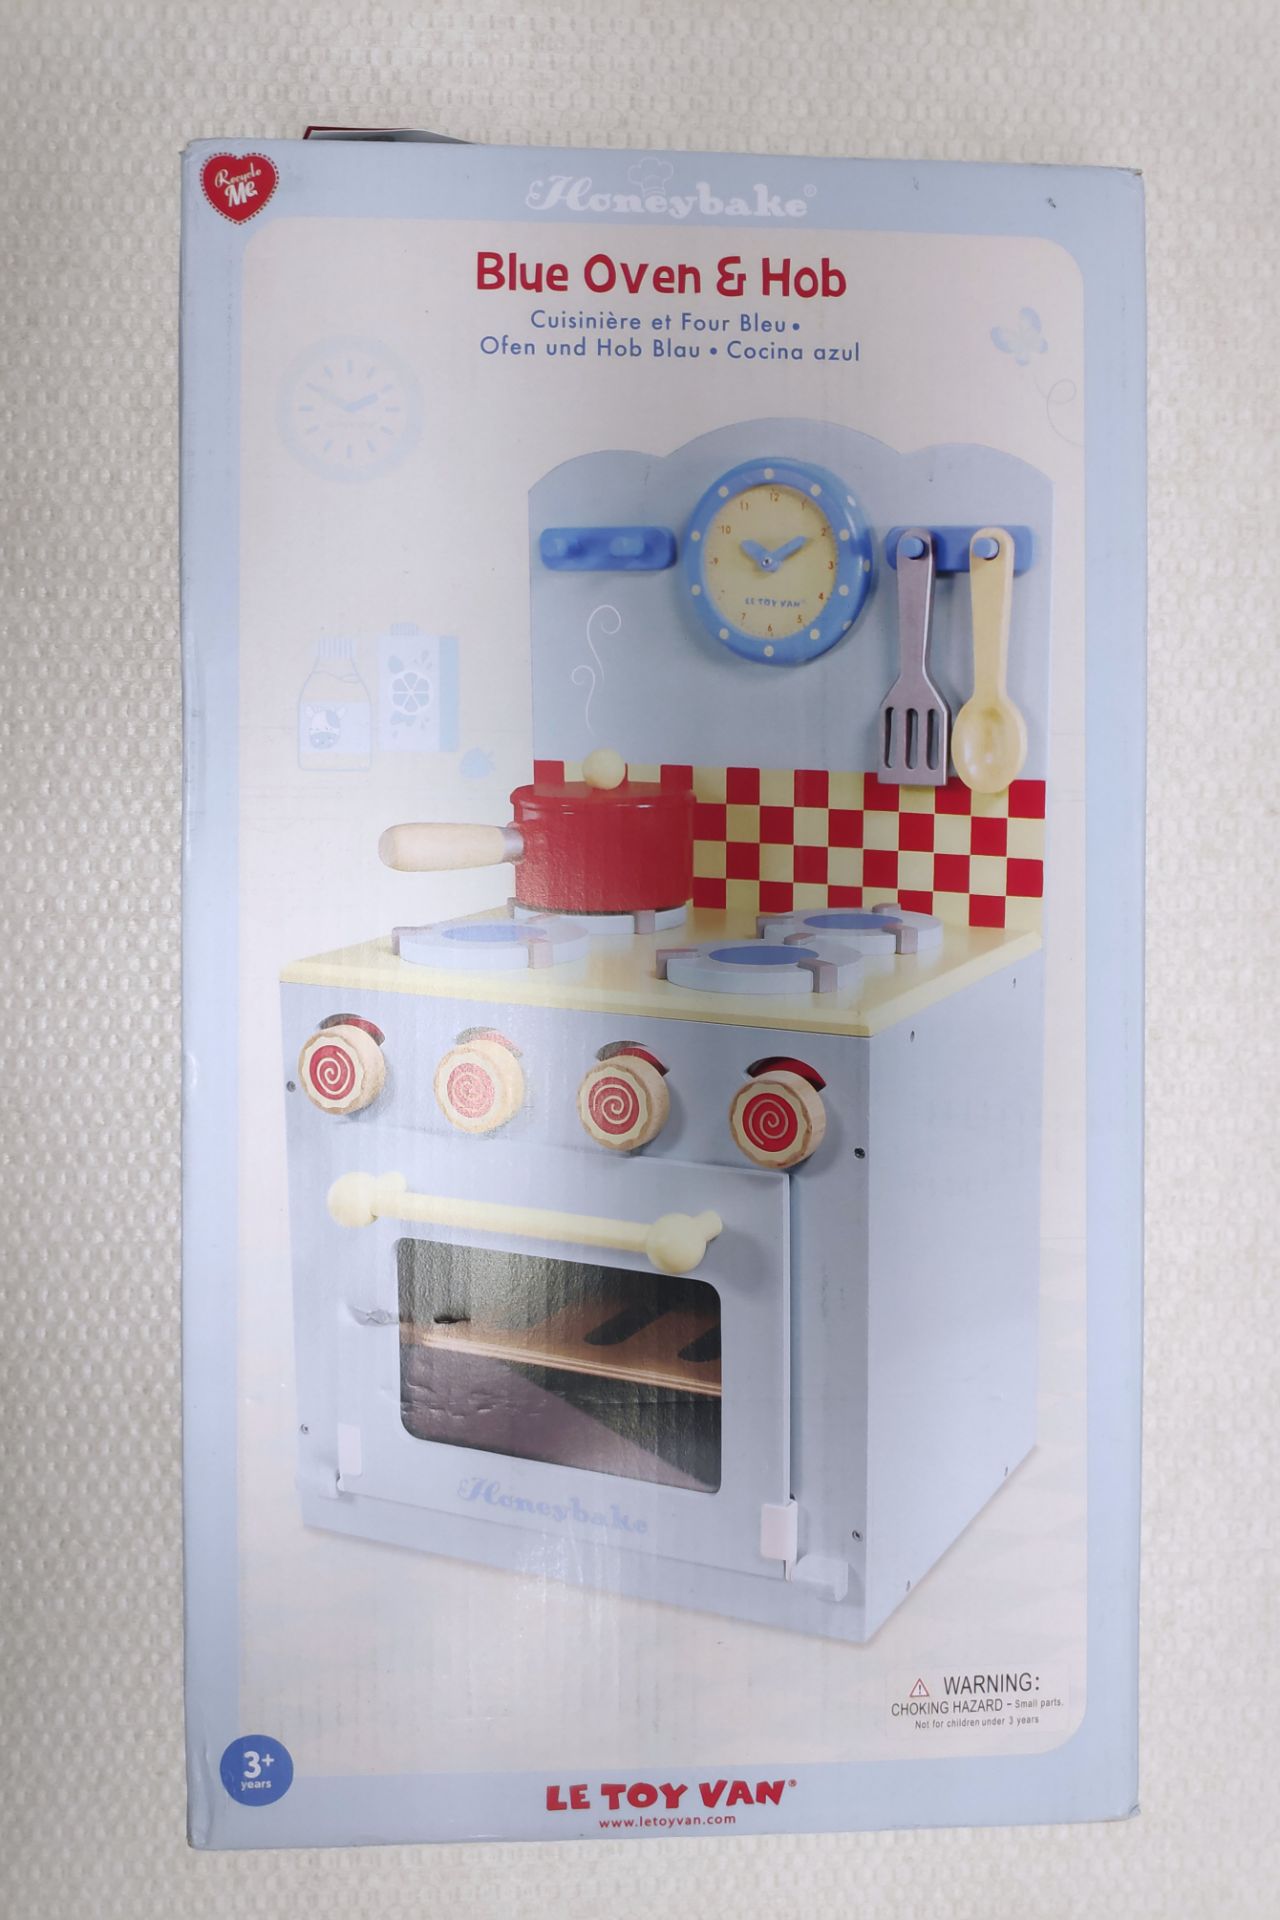 1 x Le Toy Van Honeybake Childrens Wooden Blue Oven & Hob - New/Boxed - Image 2 of 7